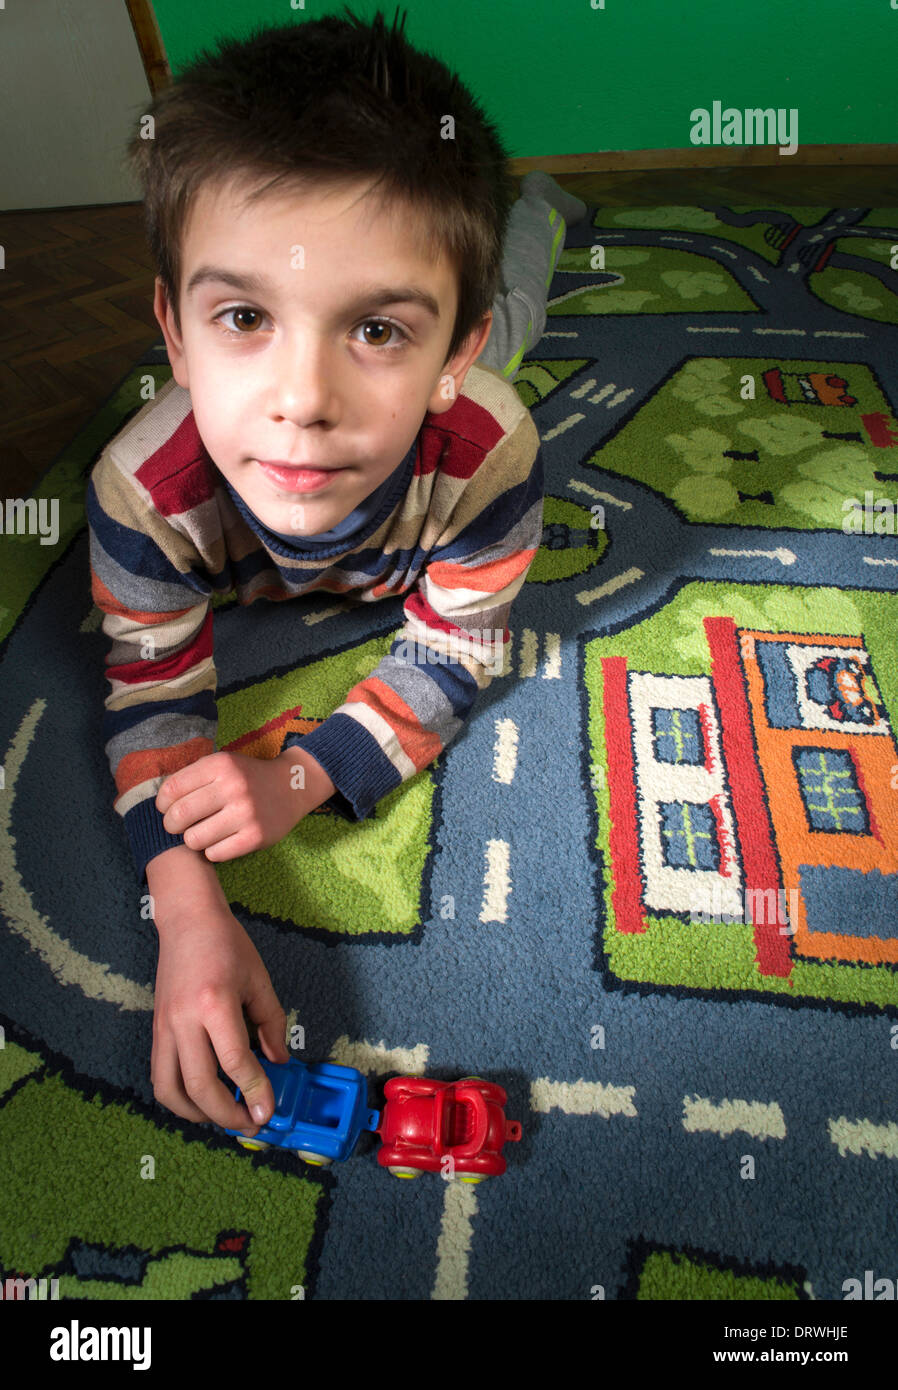 Child is playing with cars on carpet. Stock Photo